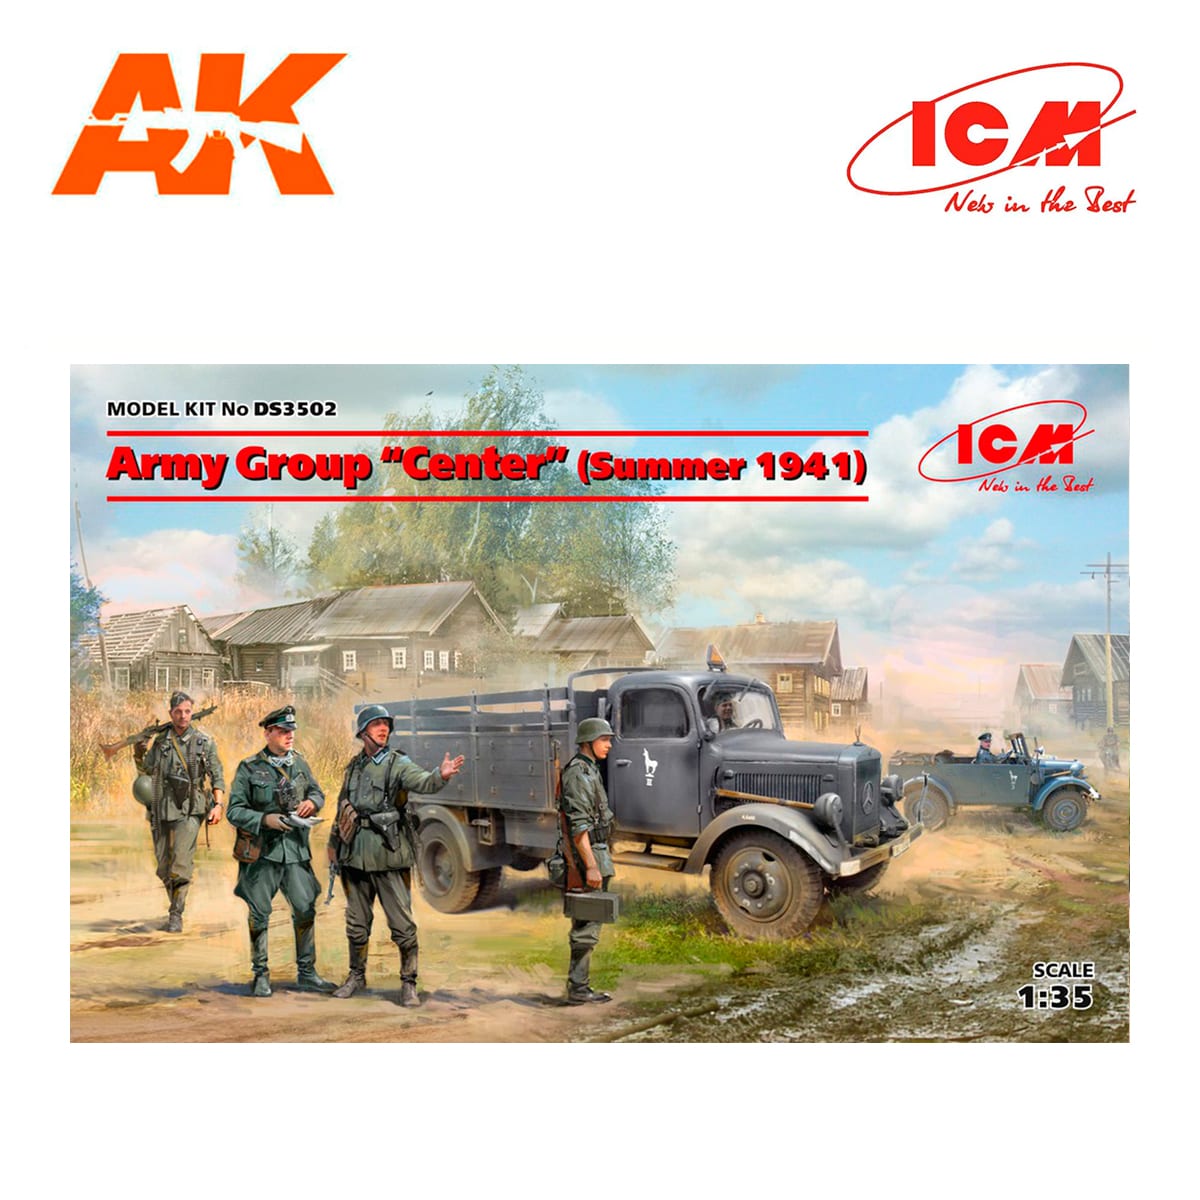 Army Group «Center» (Summer 1941)   (Kfz.1, Typ L3000S, German Infantry (4 figures), German Drivers (4 figures)) 1/35